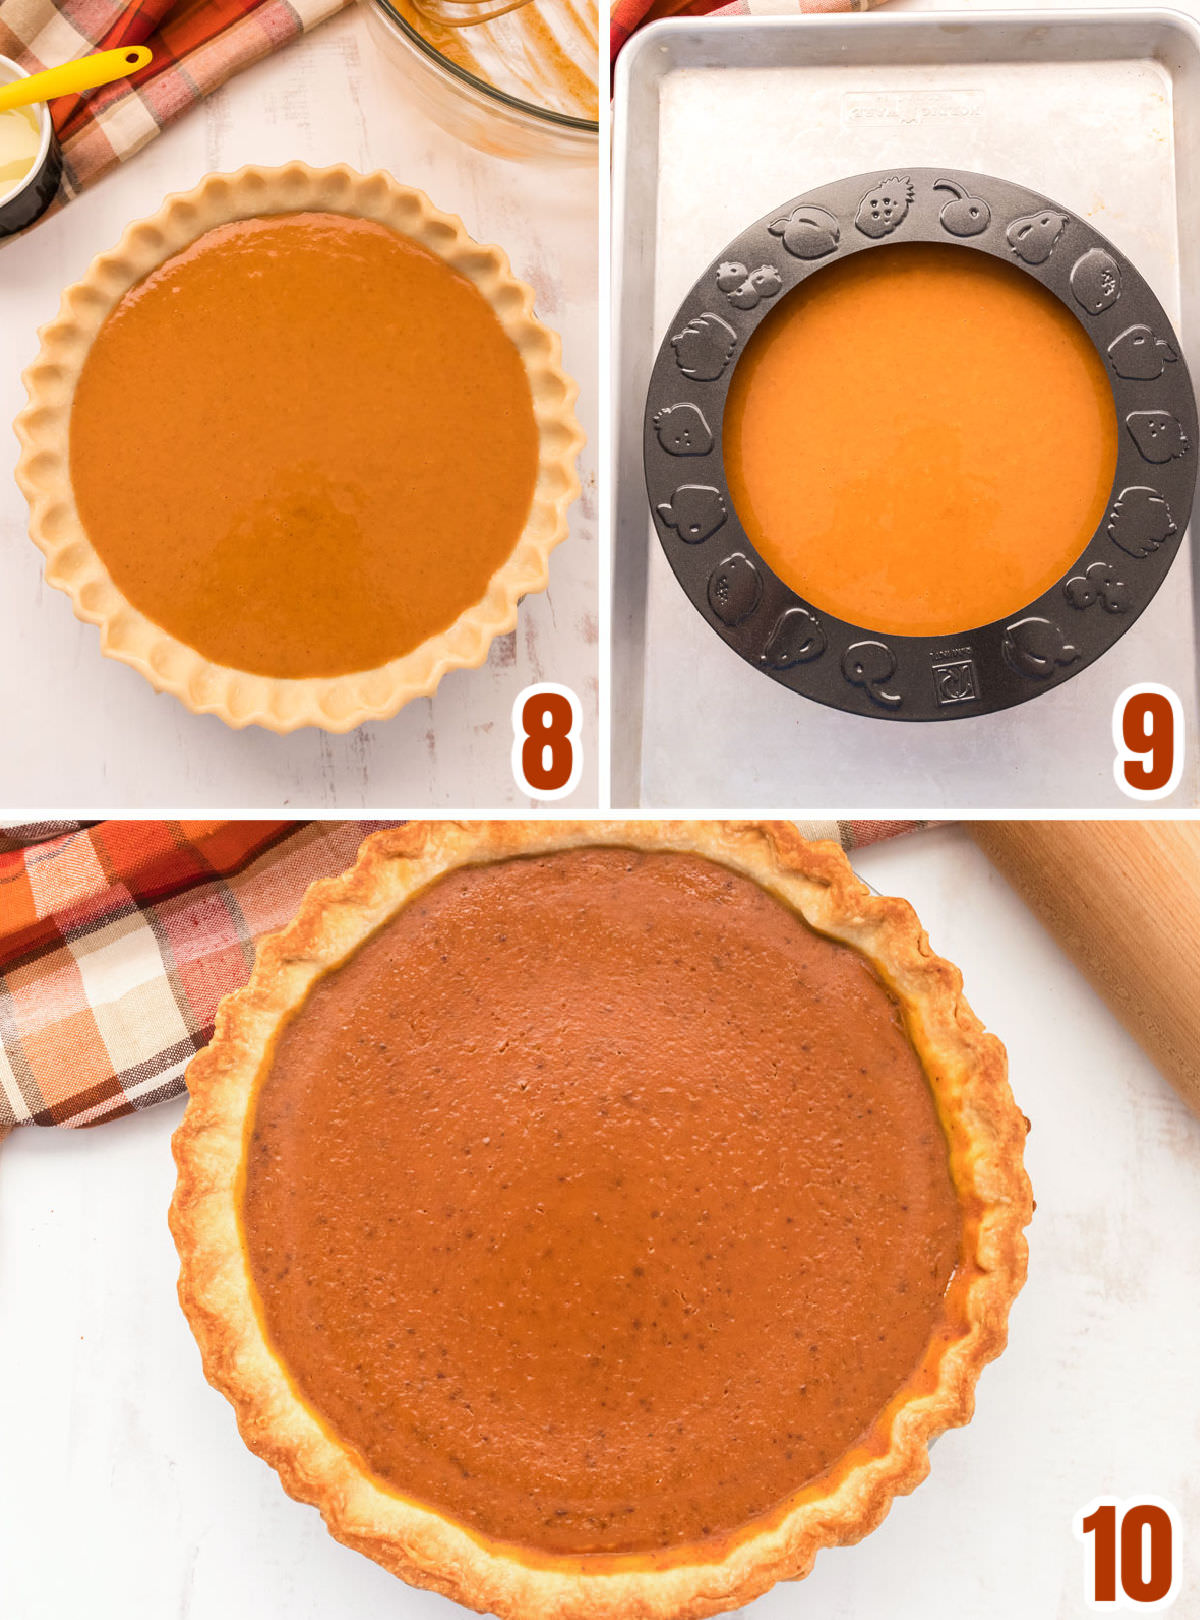 A collage image showing the steps for baking the pumpkin pie.